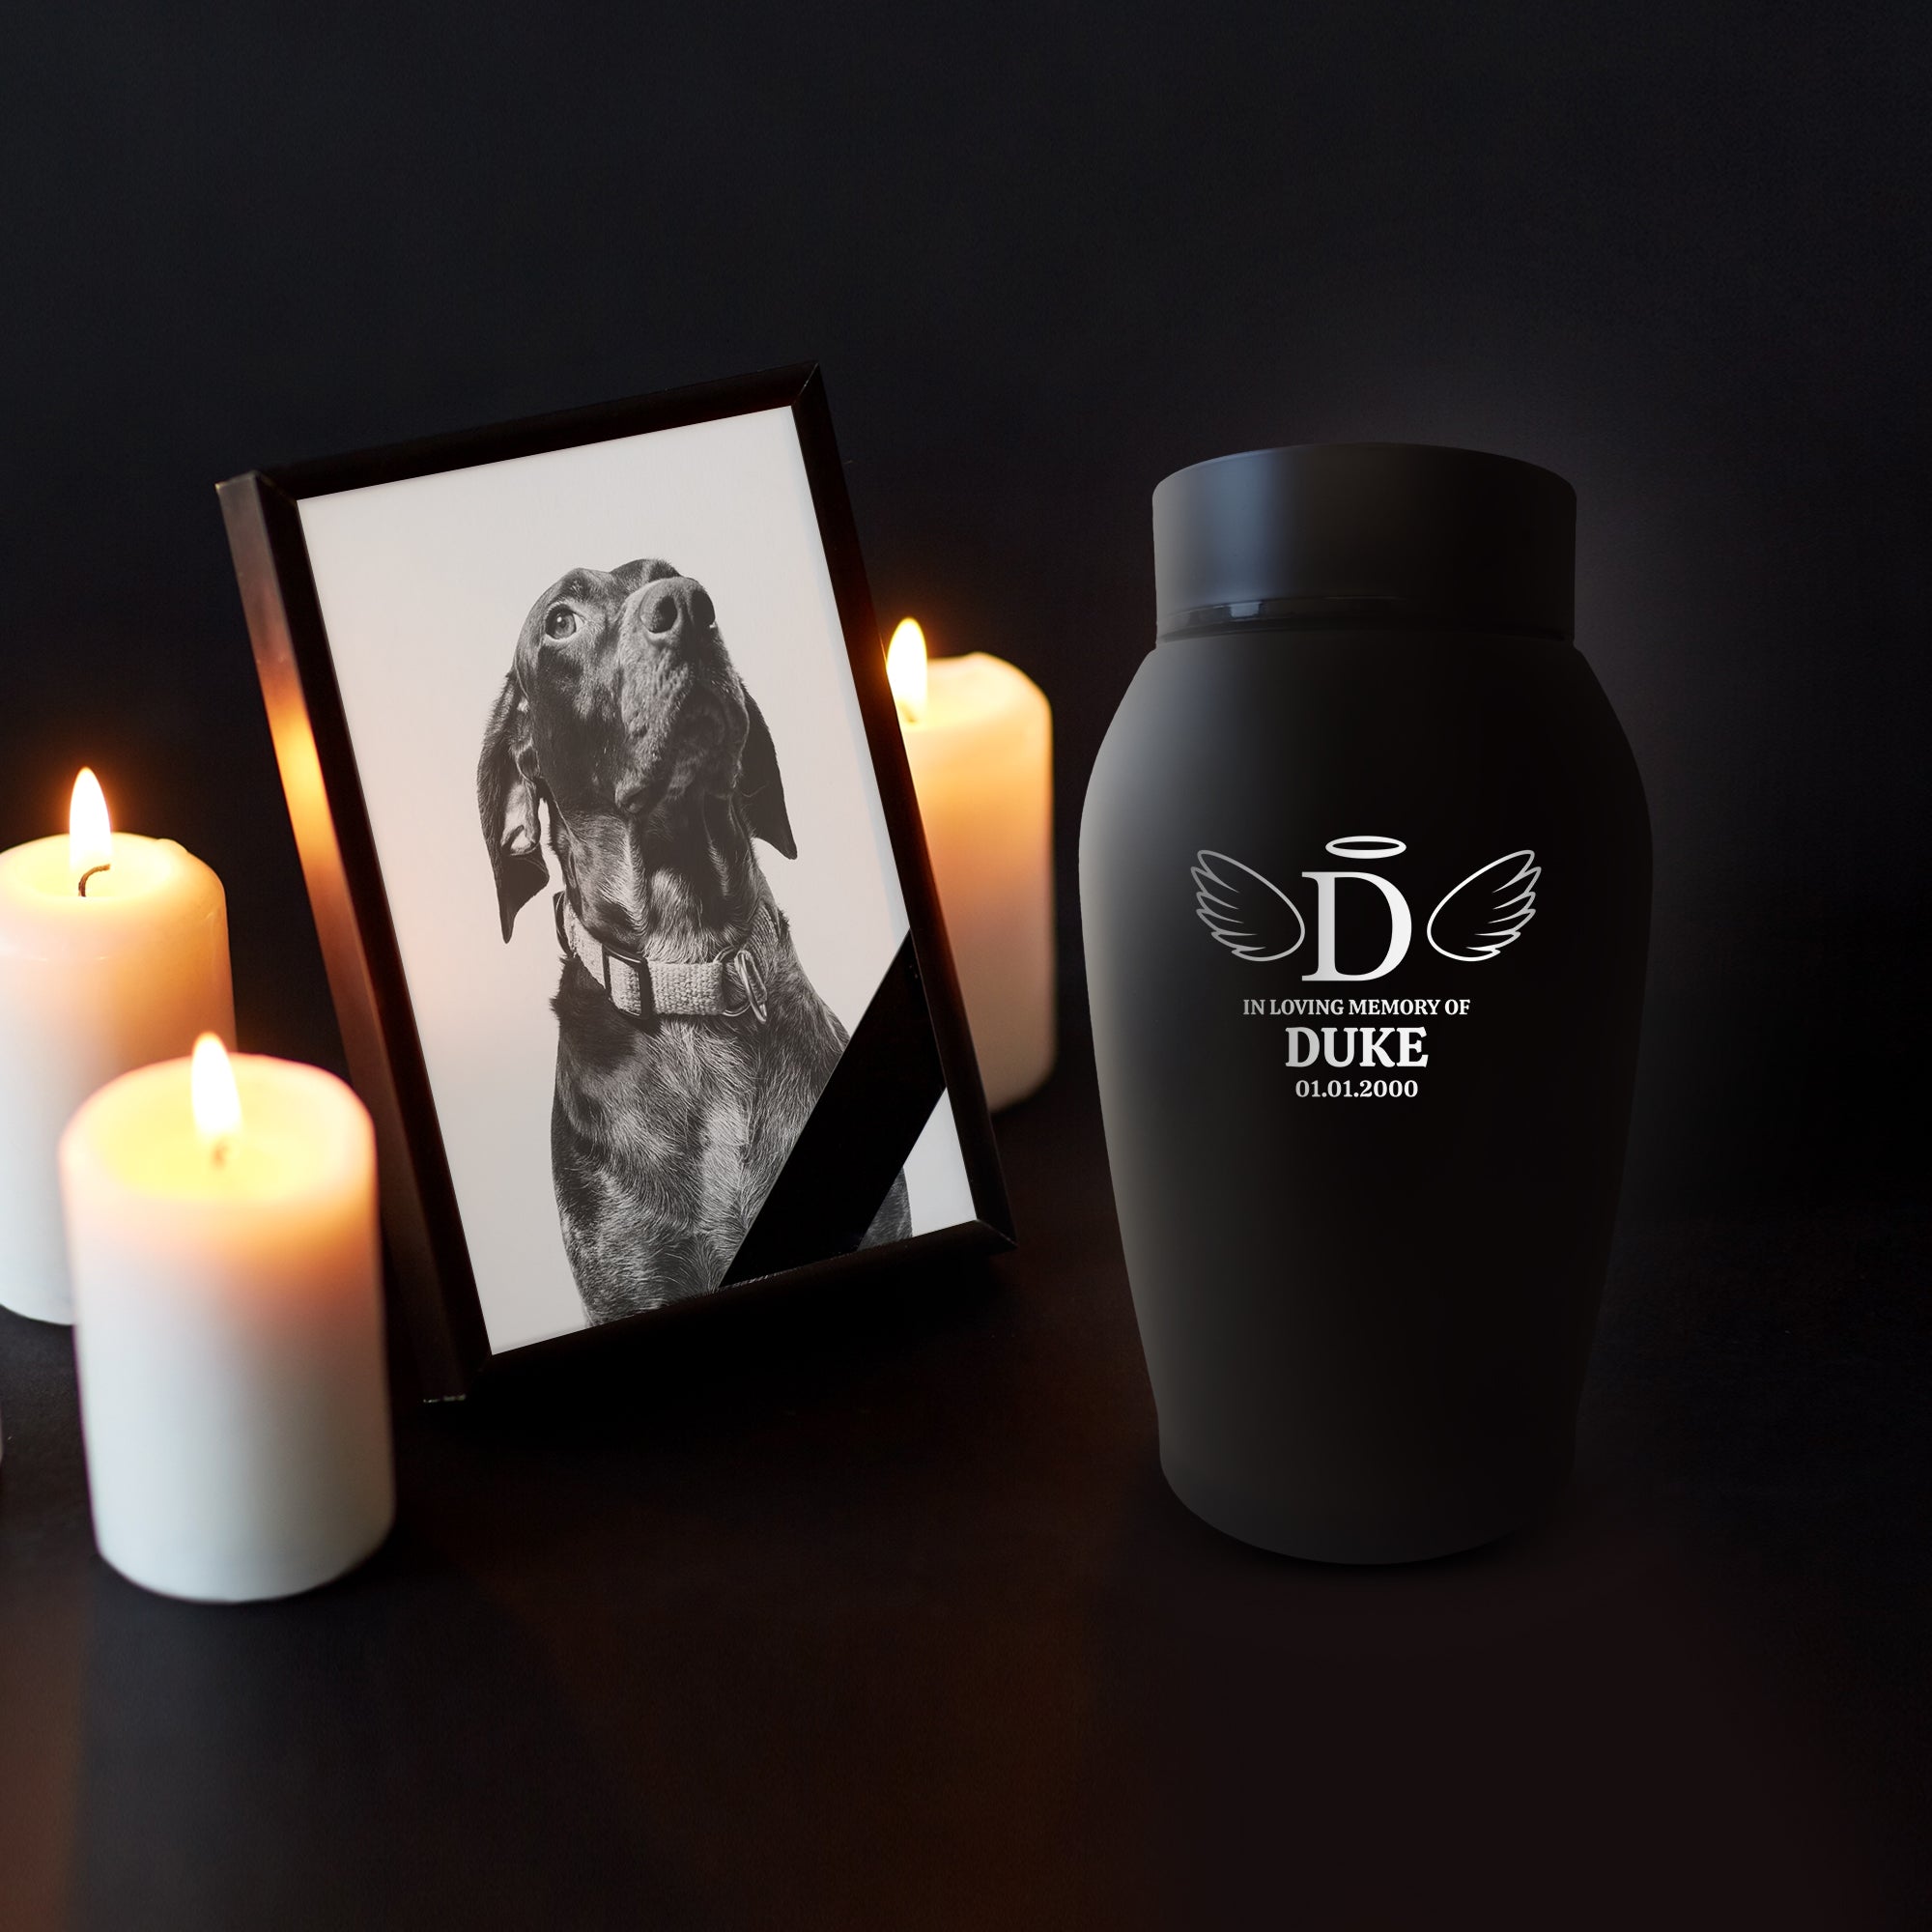 Personalized Custom Small Keepsake Urn Engraved with Pet Name, Date, and Dog Design - 5.2" Black Powder Coated Steel Cremation Urn for Dogs Ashes - Airtight Closure | 12-16 lb Capacity